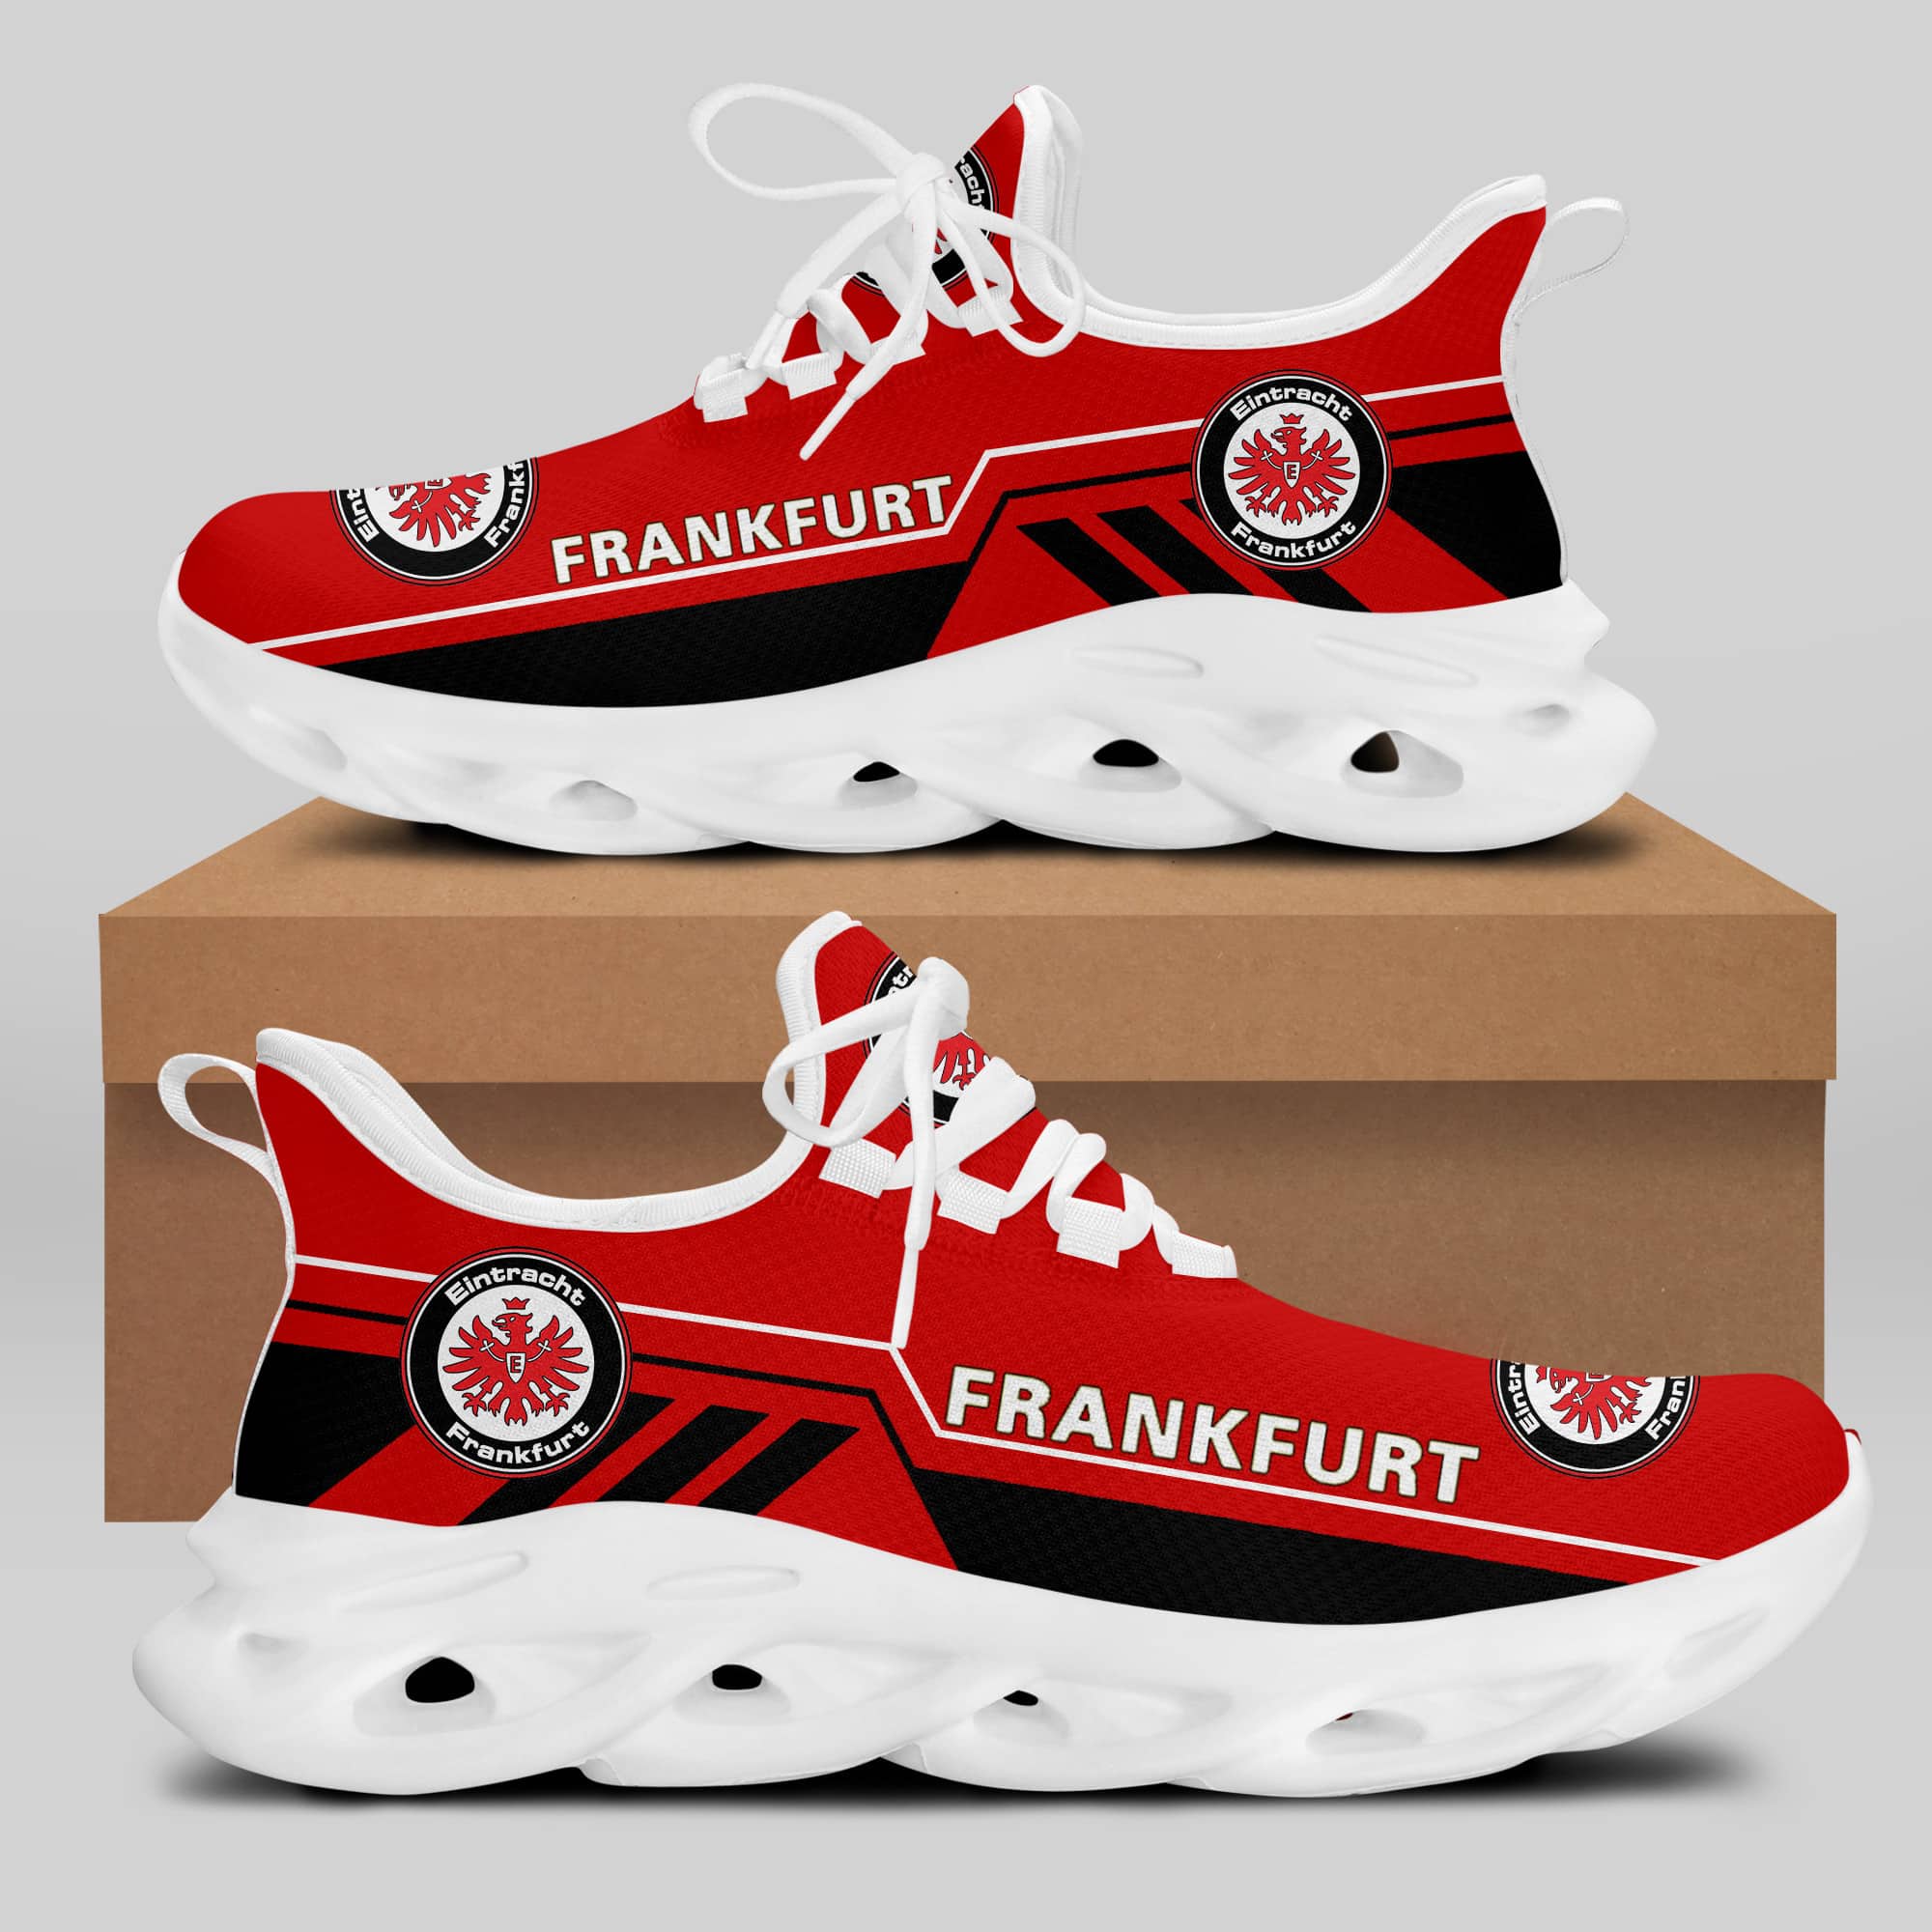 Eintracht Frankfurt Running Shoes Max Soul Shoes Sneakers Ver 13 2